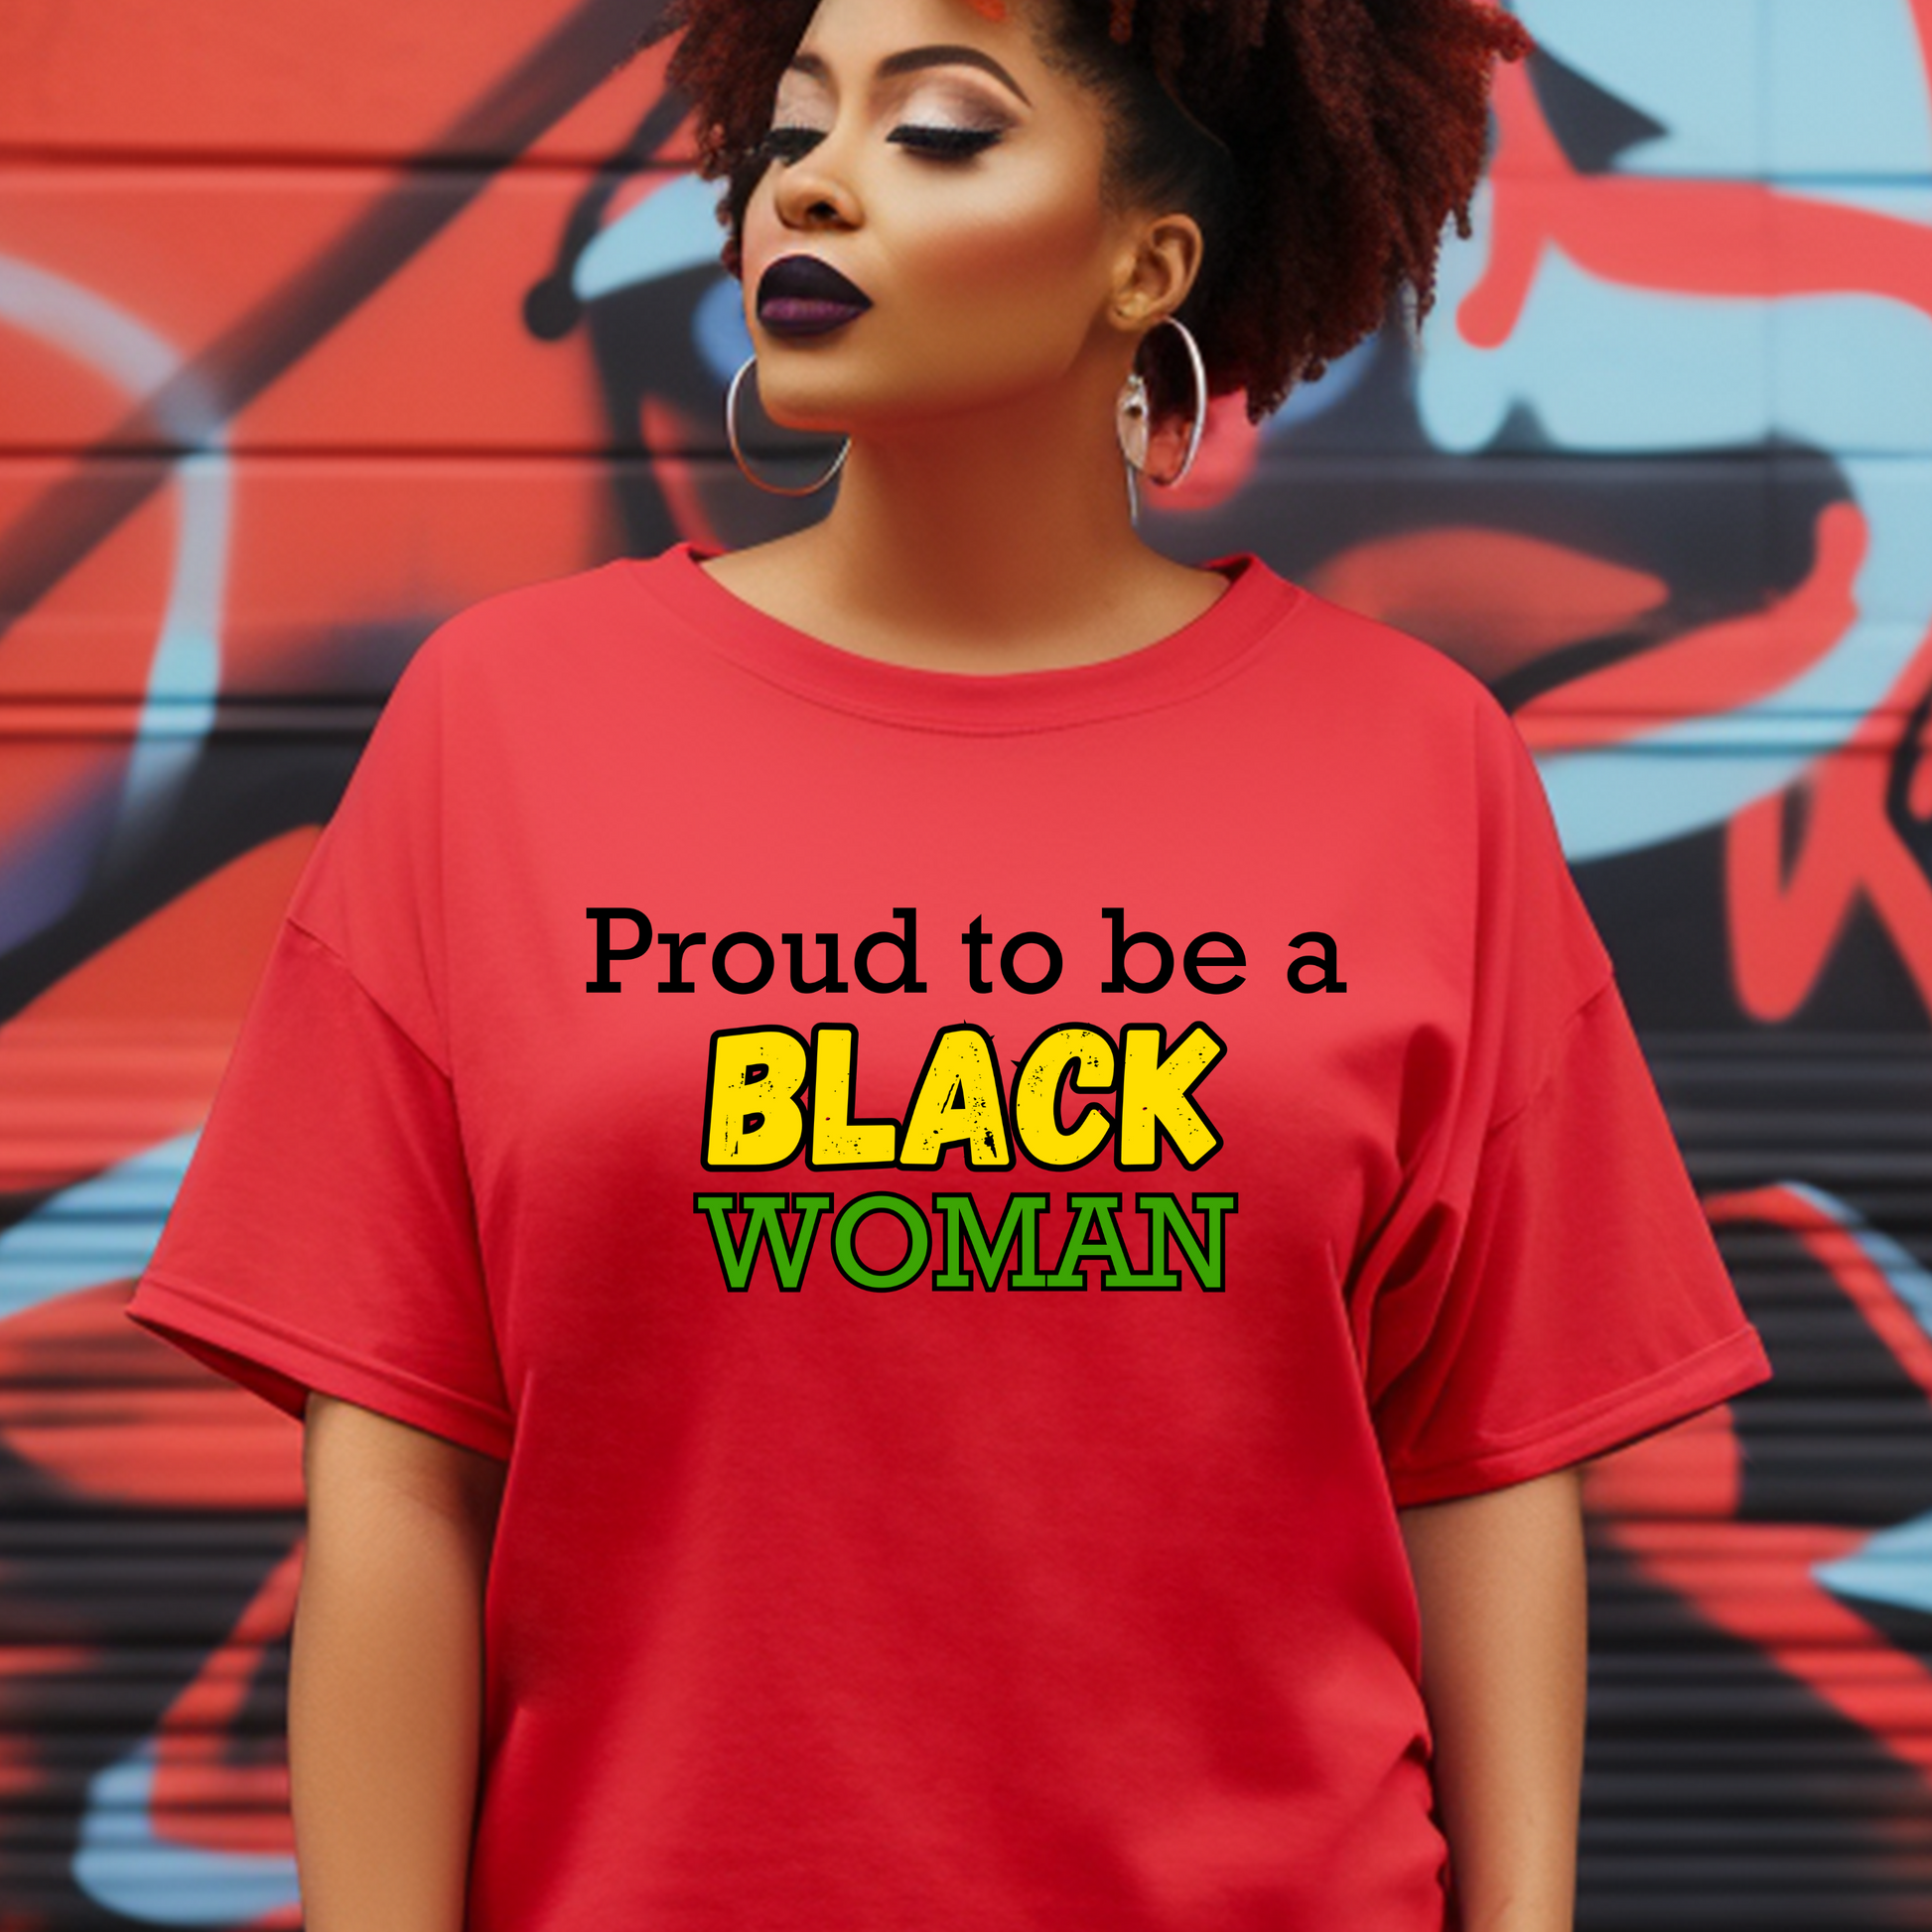 Red 'Proud to be a Black Christian Woman' T-shirt - Faith Fashion at Triumph Tees. Stylish tee celebrating faith & Black History. Available in various sizes. Order now! #faithfashion #blackhistory